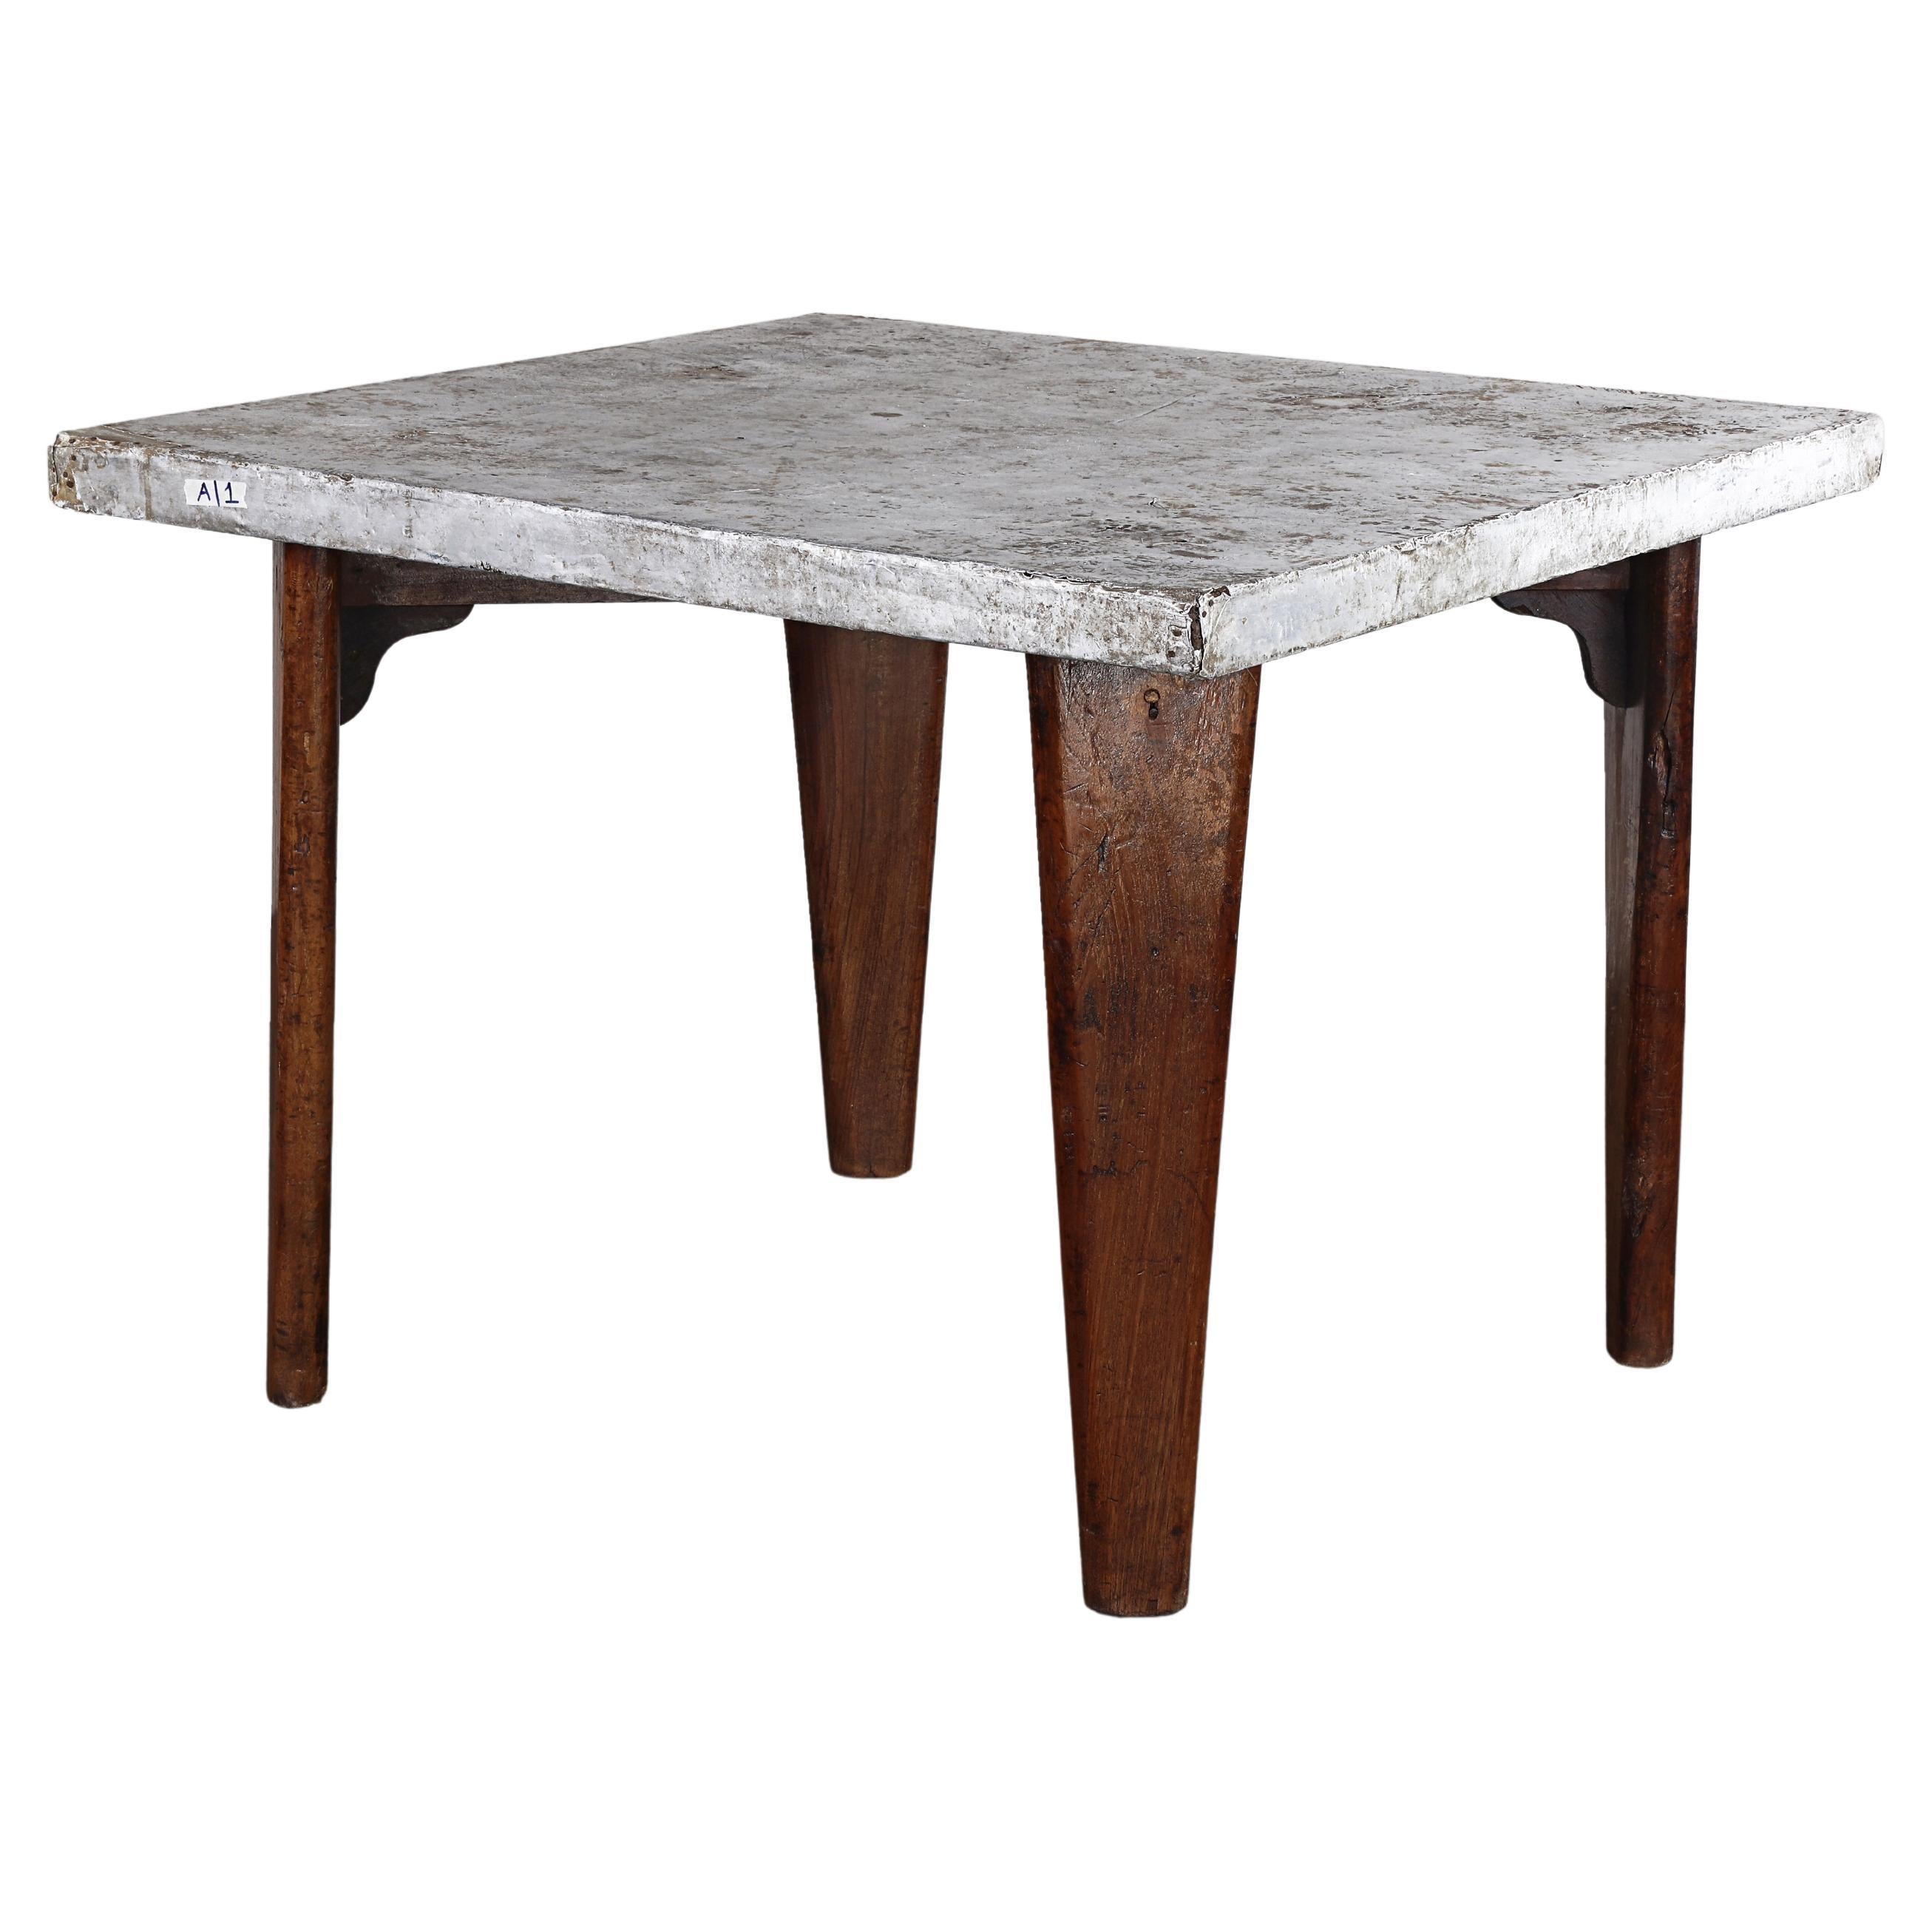 Pierre Jeanneret PJ-TA-04-B Metal Square Table / Authentic Mid-Century Modern For Sale